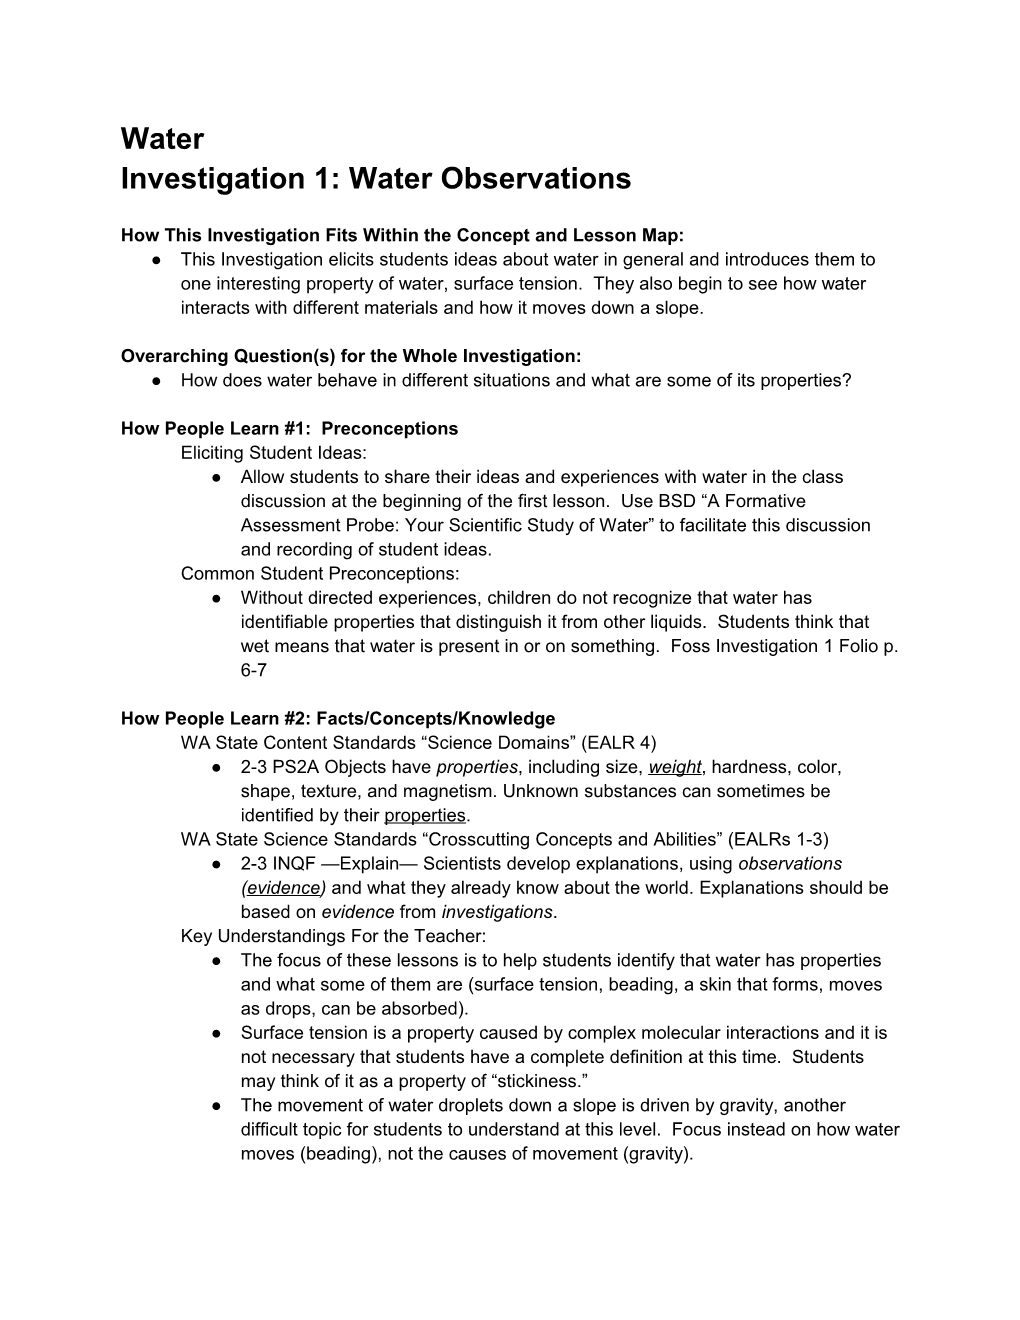 How This Investigation Fits Within the Concept and Lesson Map